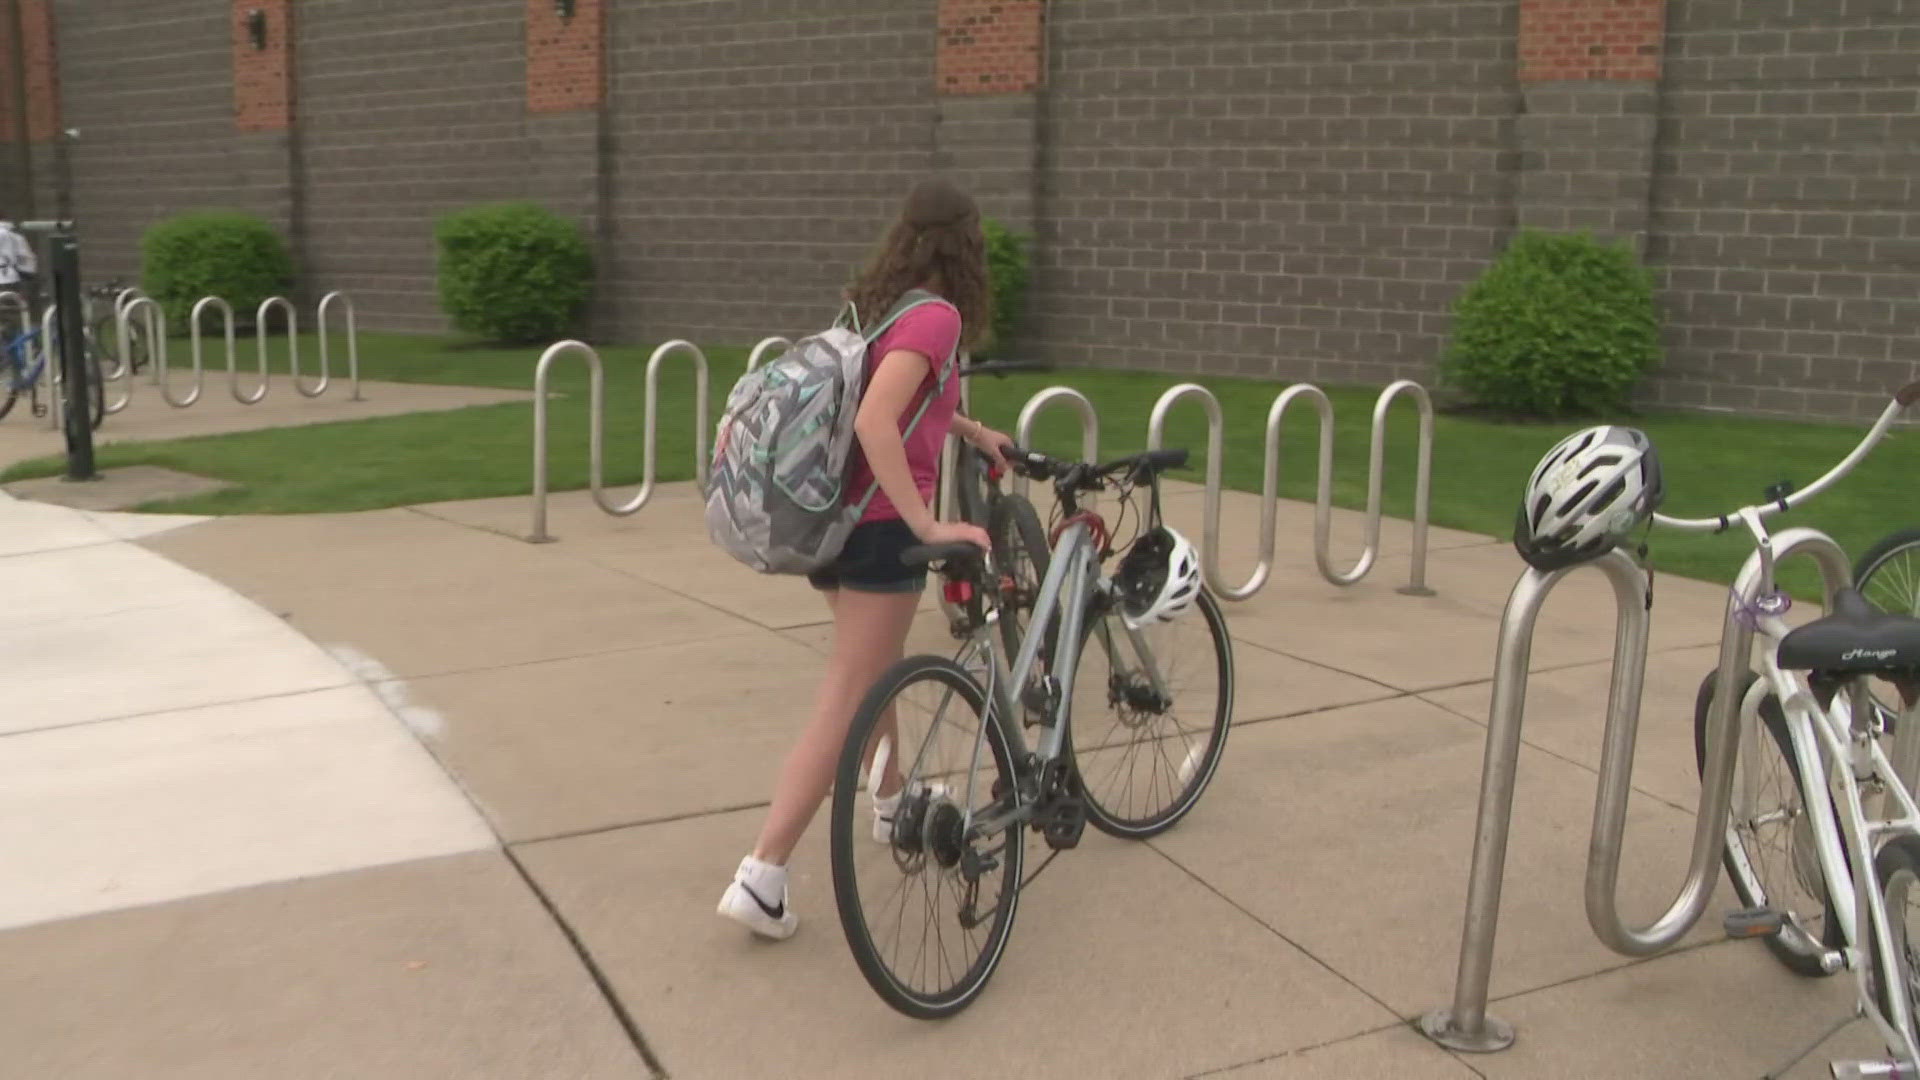 These days, students at Bay Village Middle School are swapping four wheels for two.